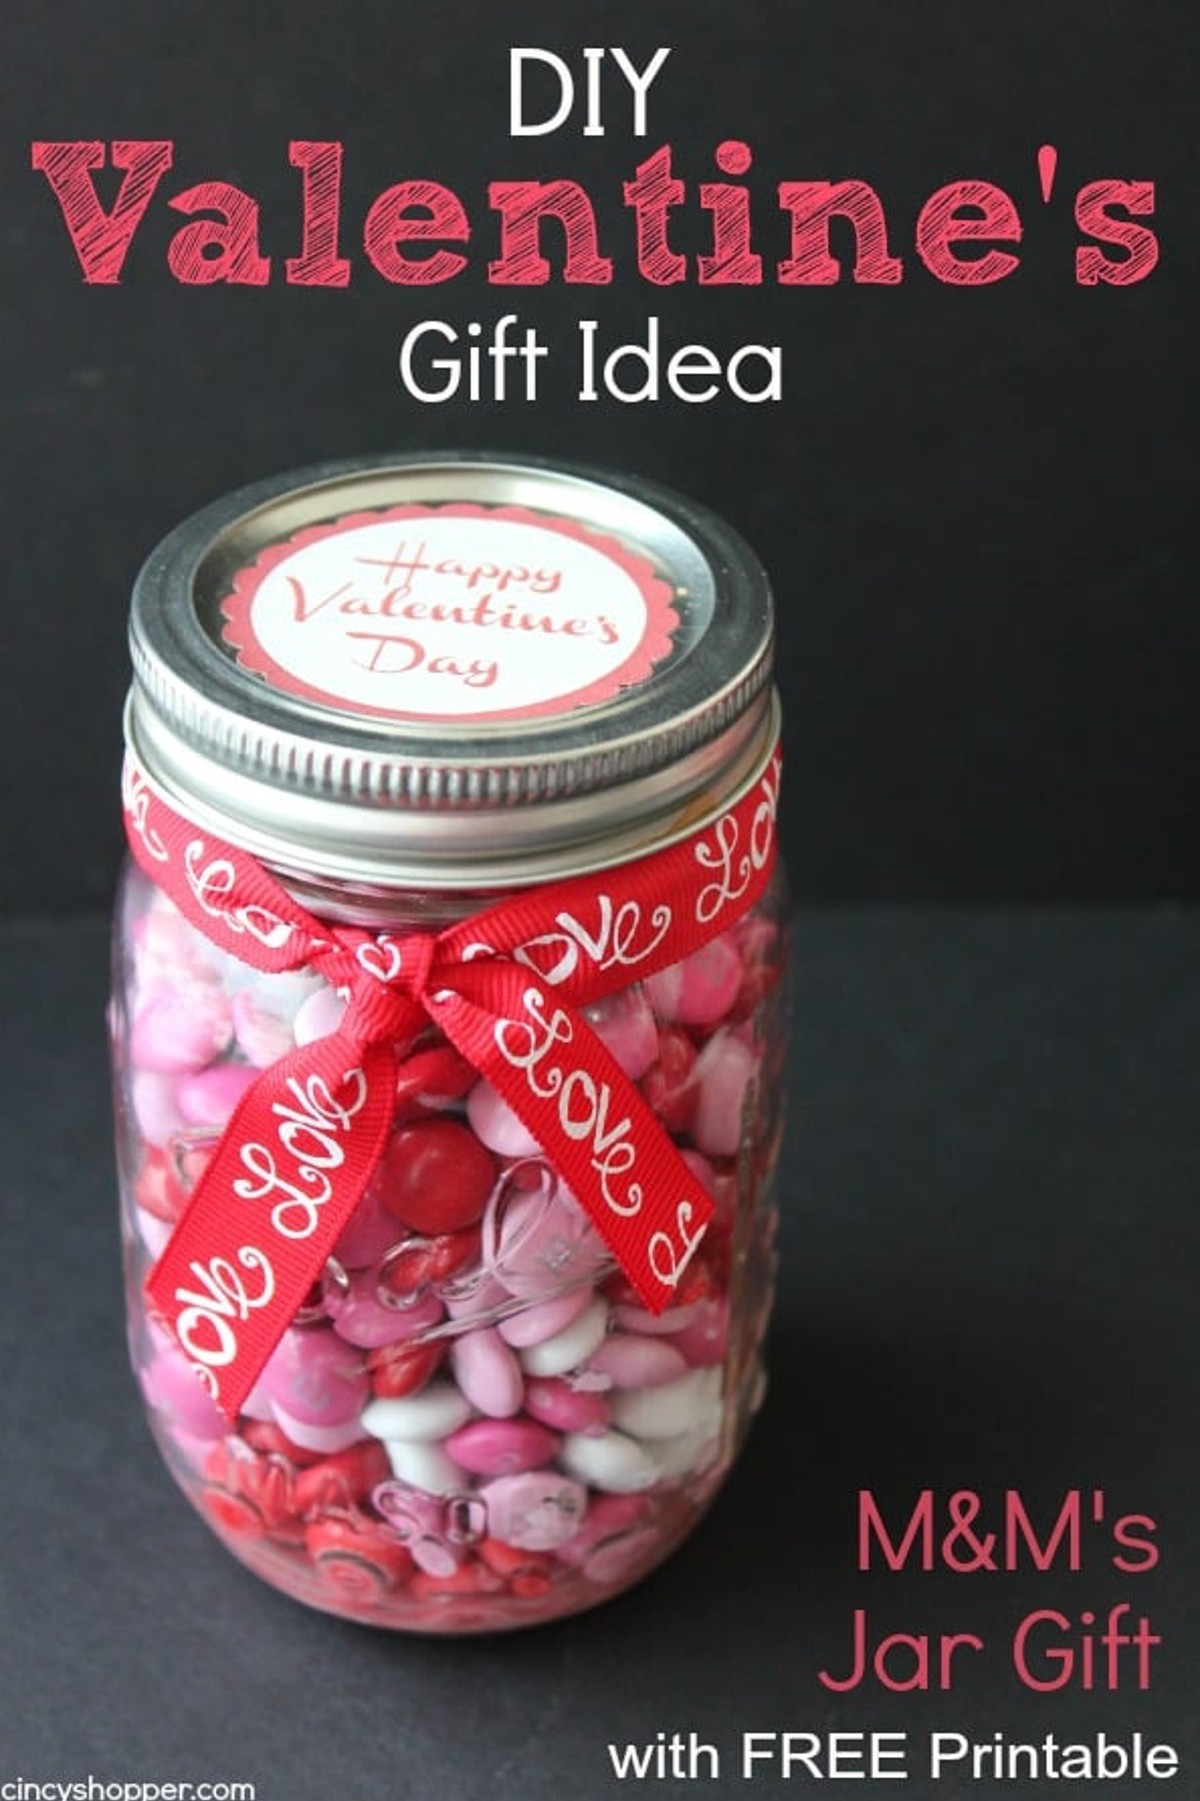 DIY VALENTINE’S DAY GIFT M&M’S IN JAR WITH FREE PRINTABLE LABEL